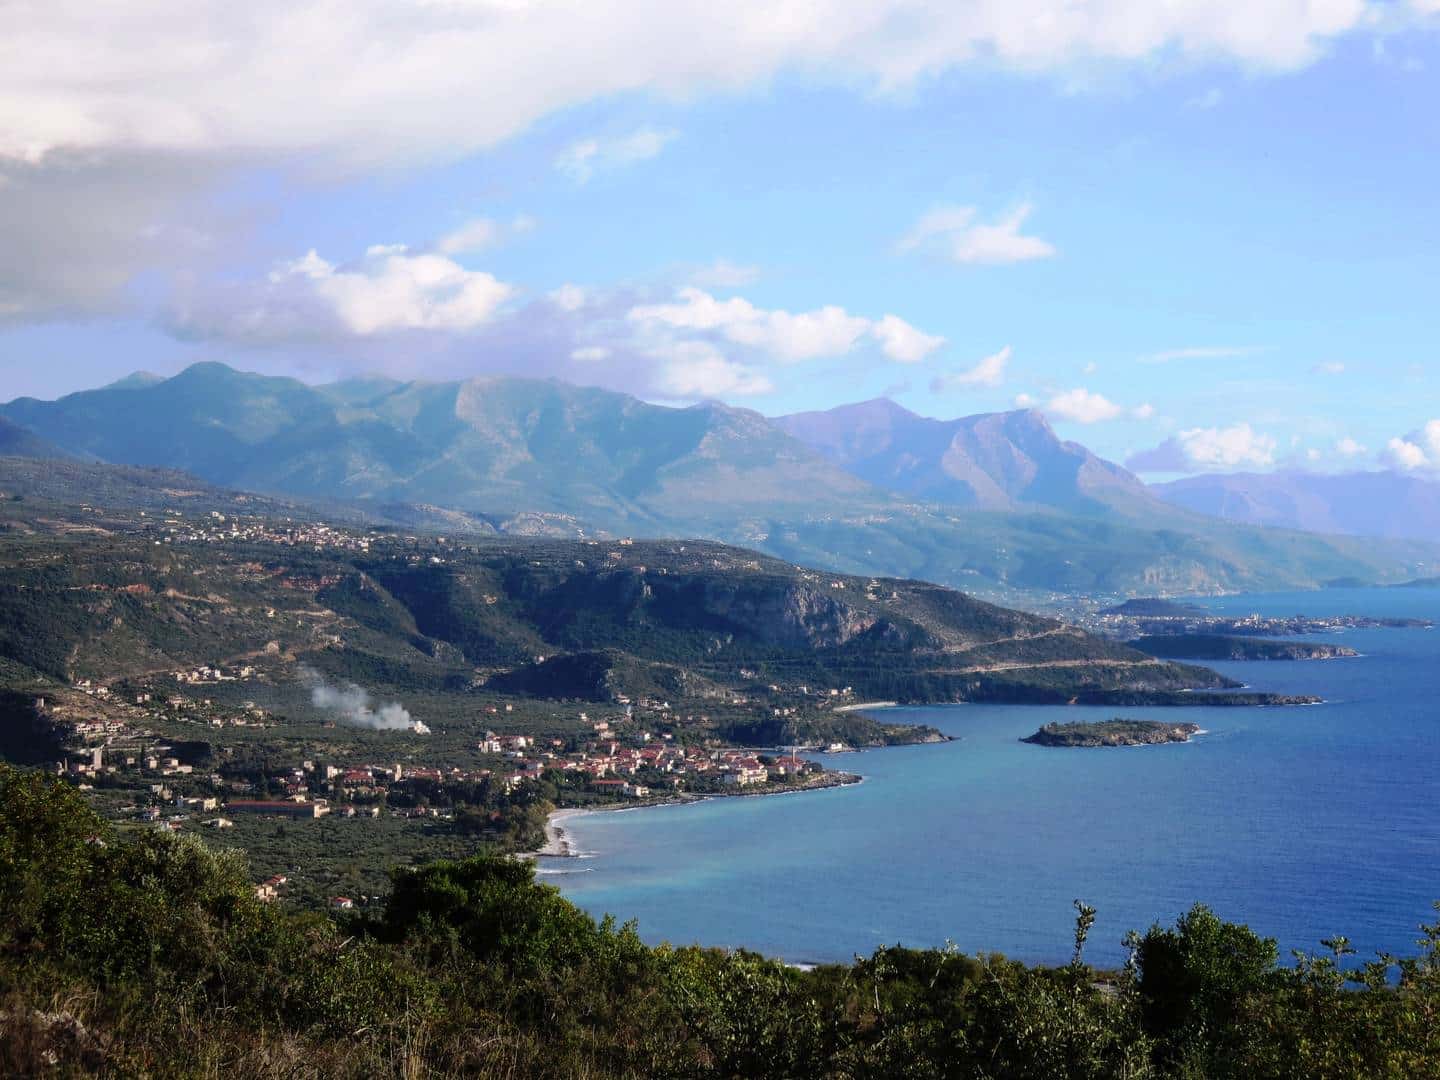 Kardamili bay with village and beaches. Taygetos and coastline in background.